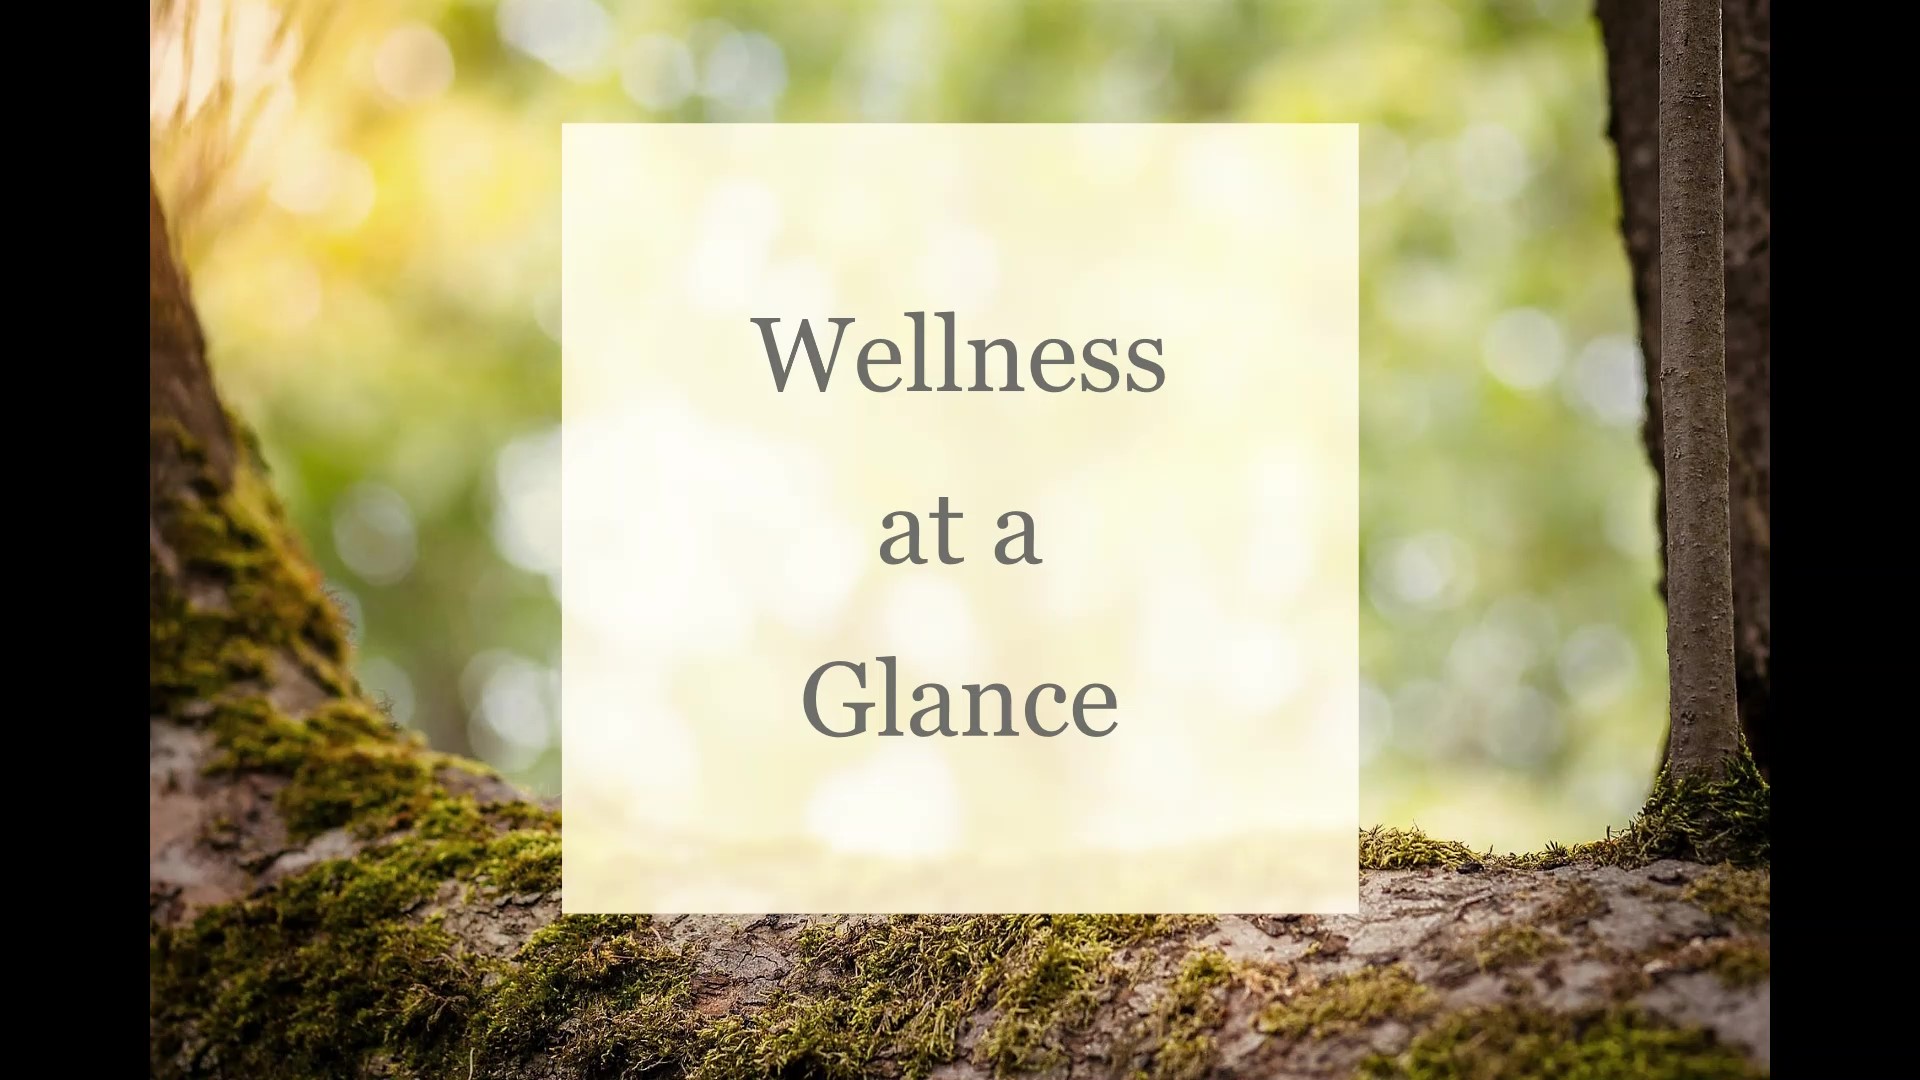 wellness at a glance sign in nature